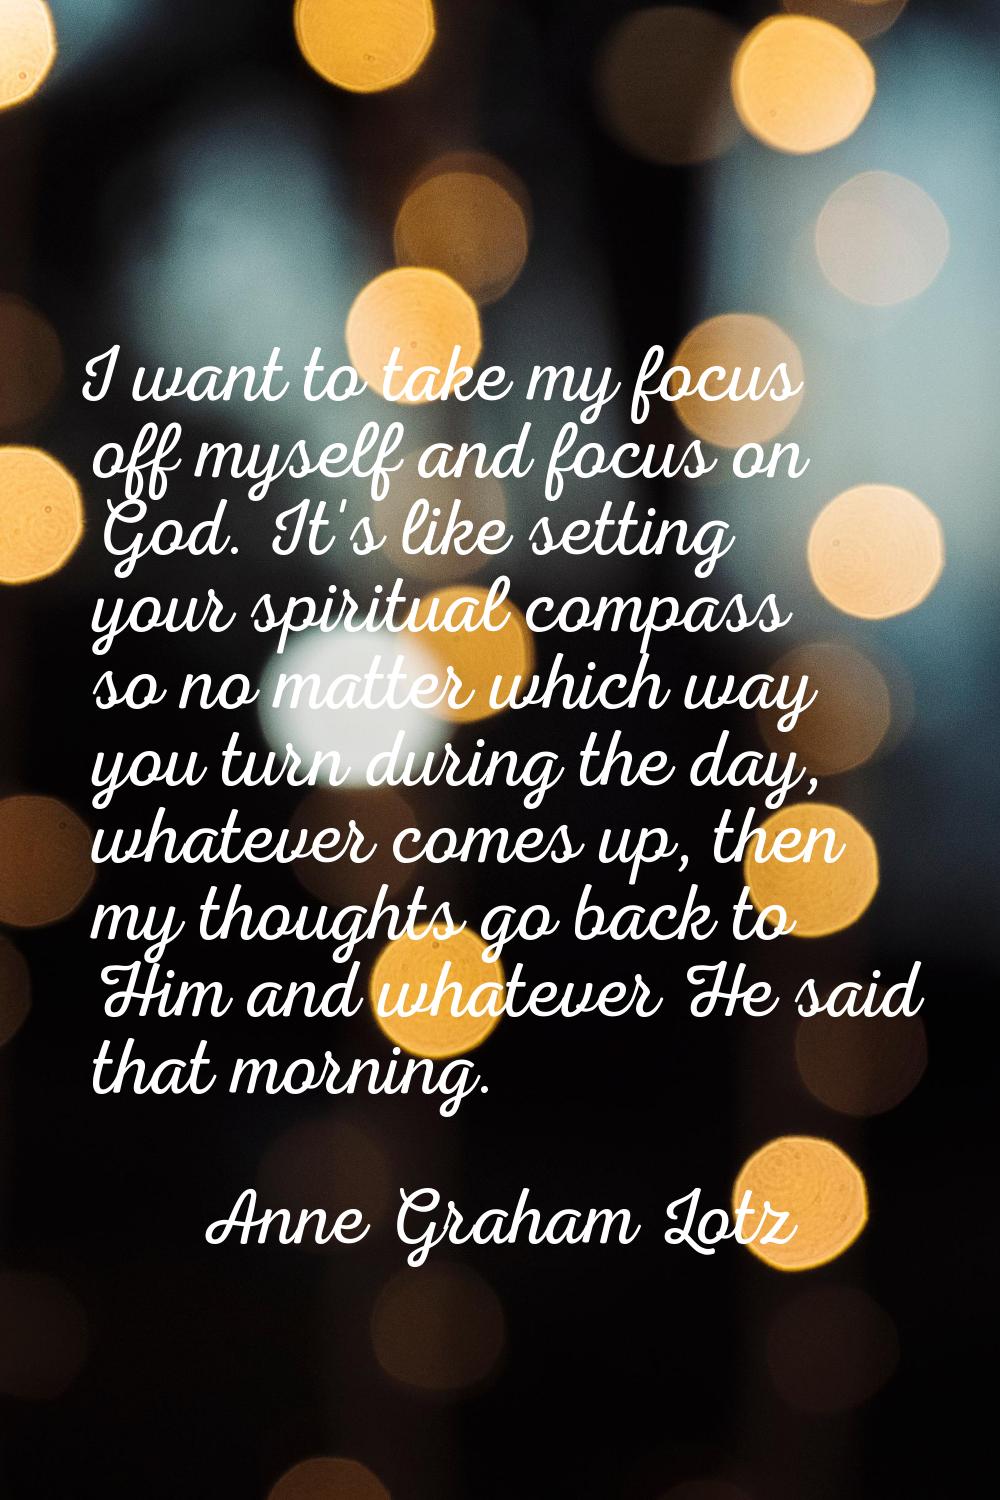 I want to take my focus off myself and focus on God. It's like setting your spiritual compass so no